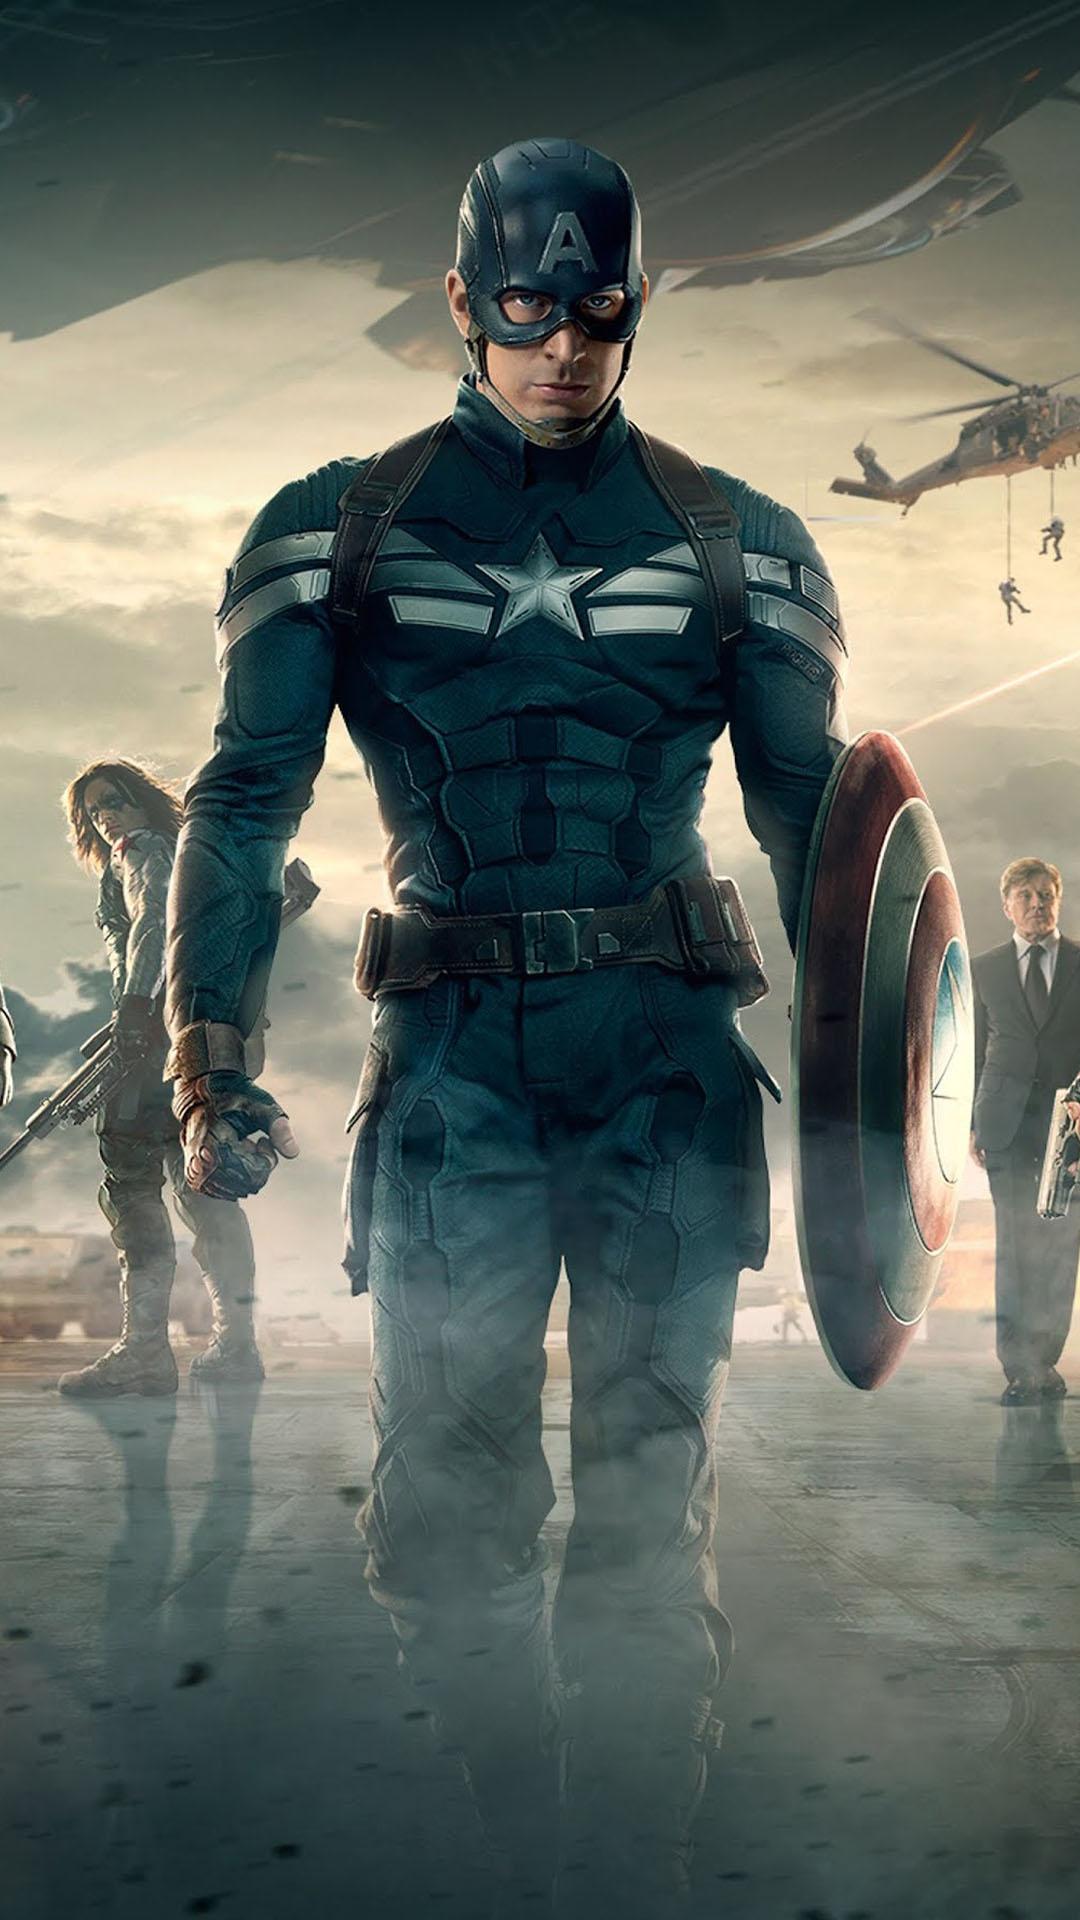 Captain America 2 The Winter Soldier Android Wallpaper free download